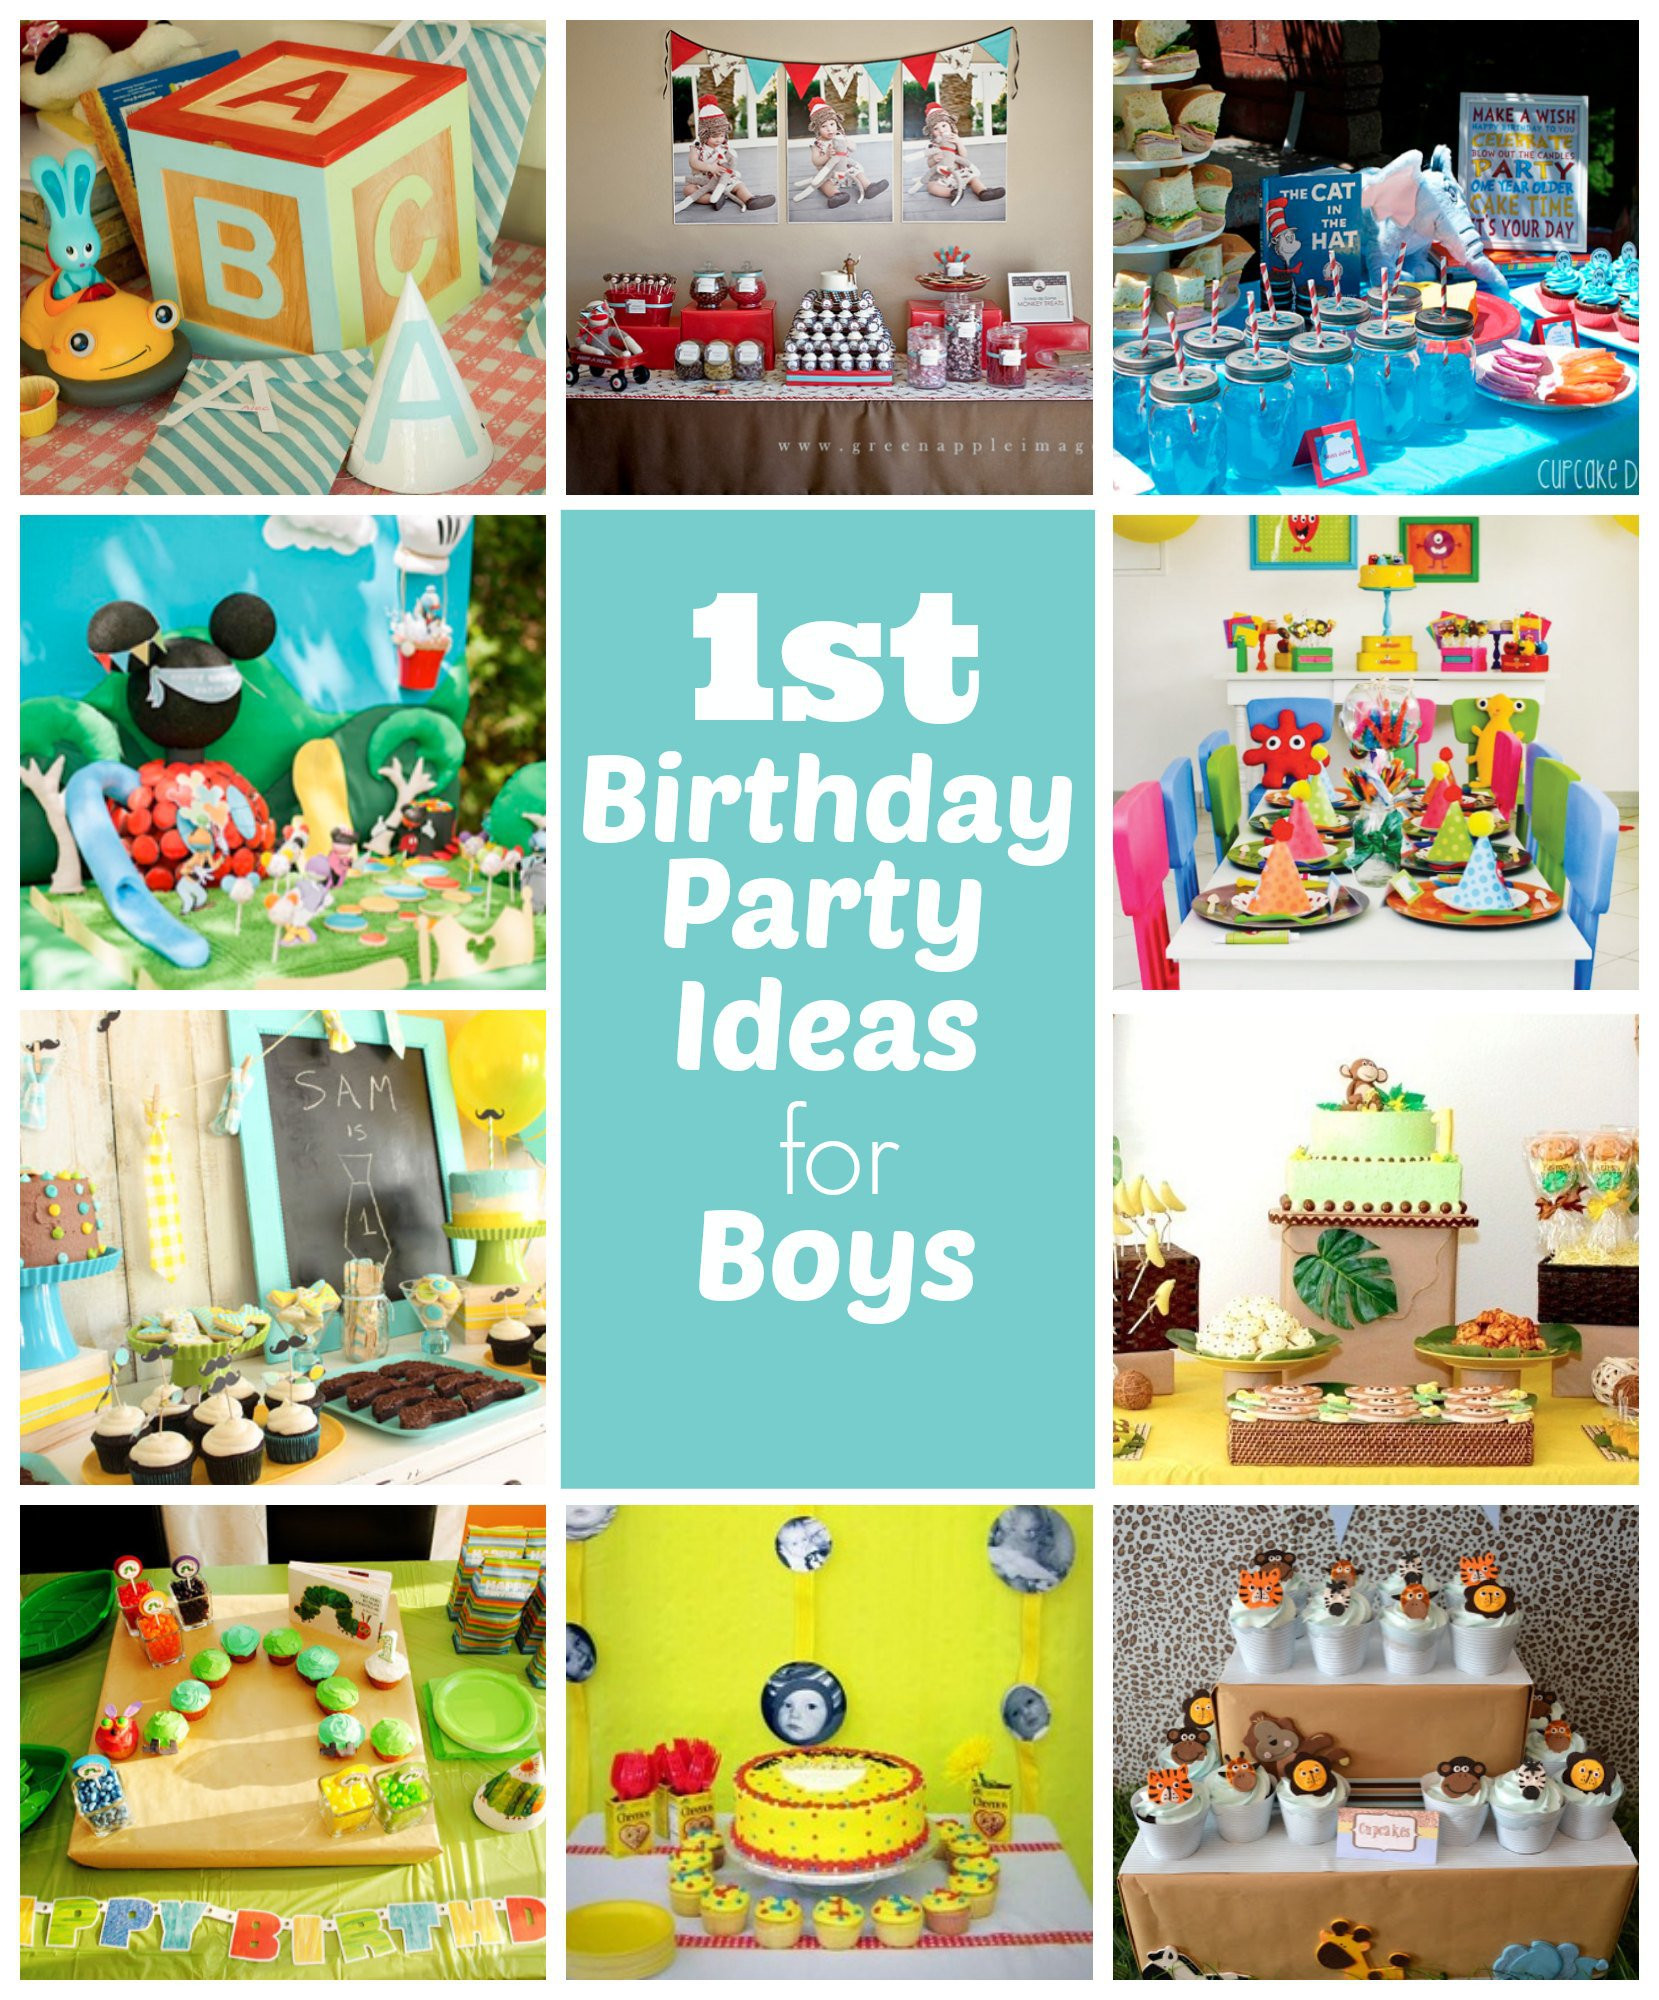 First Birthday Party Ideas For Boys
 1st Birthday Party Ideas For Boys Right Start Blog A